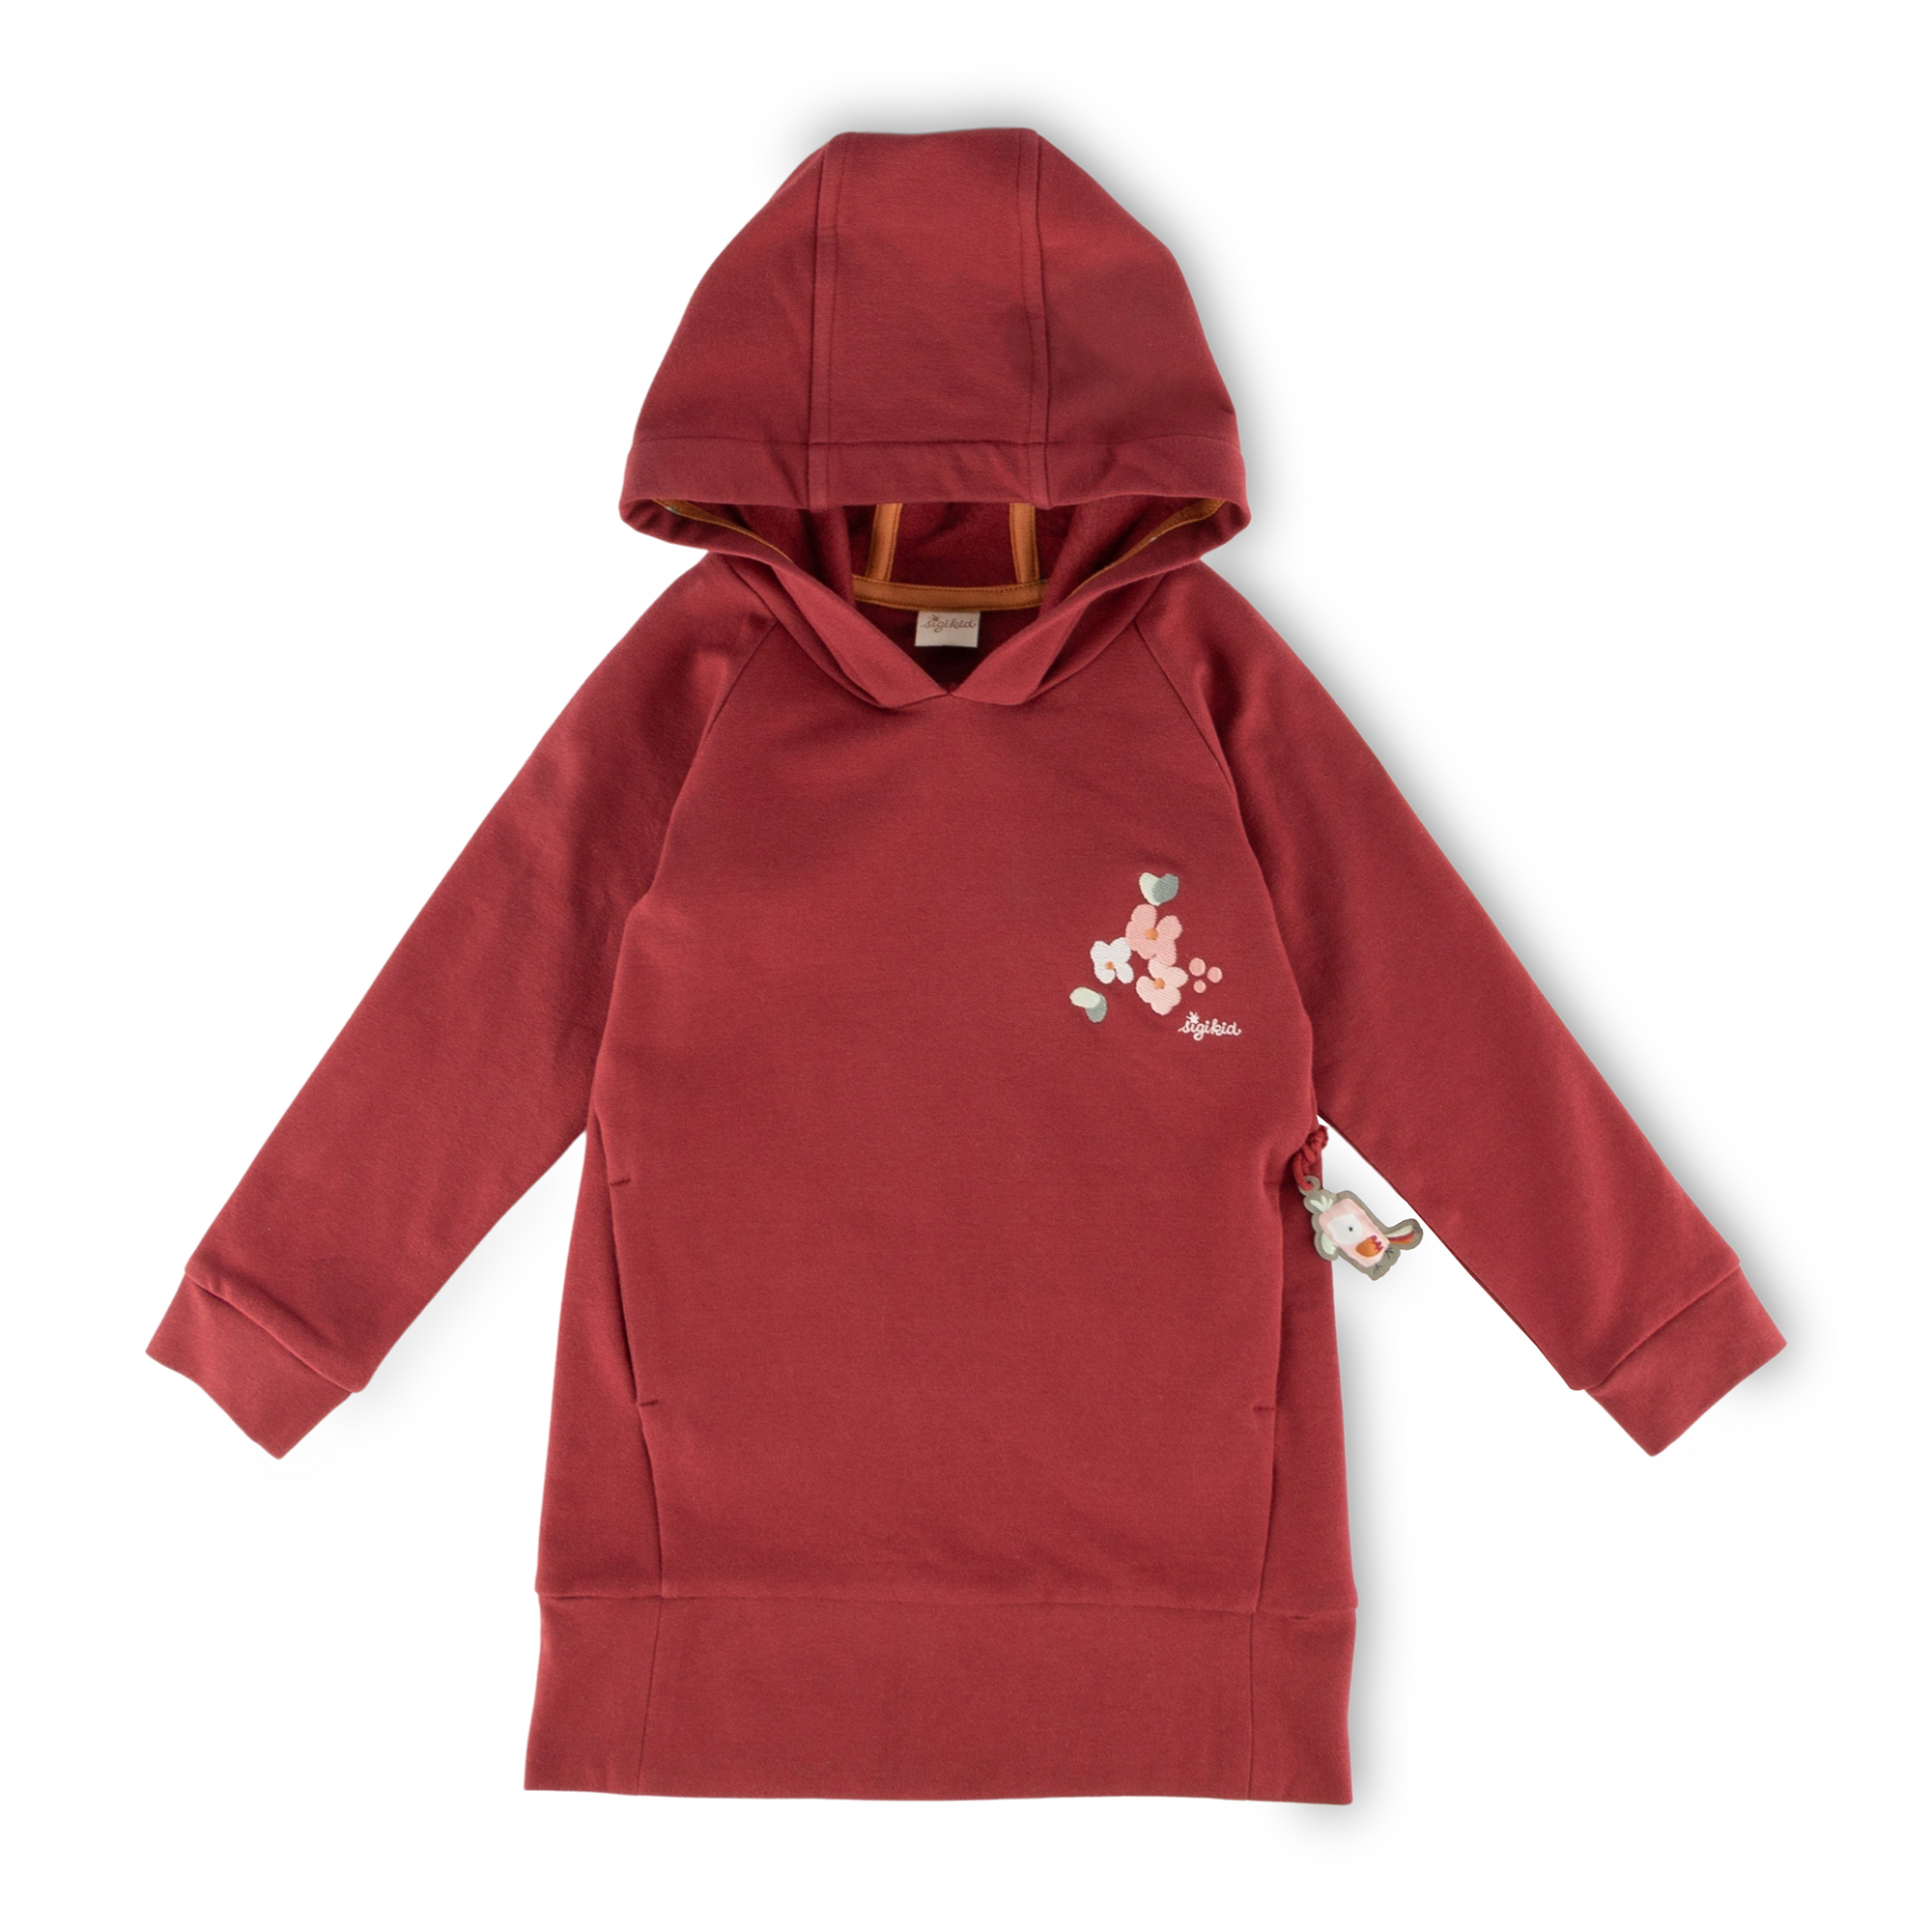 Children's hooded sweat dress with pockets